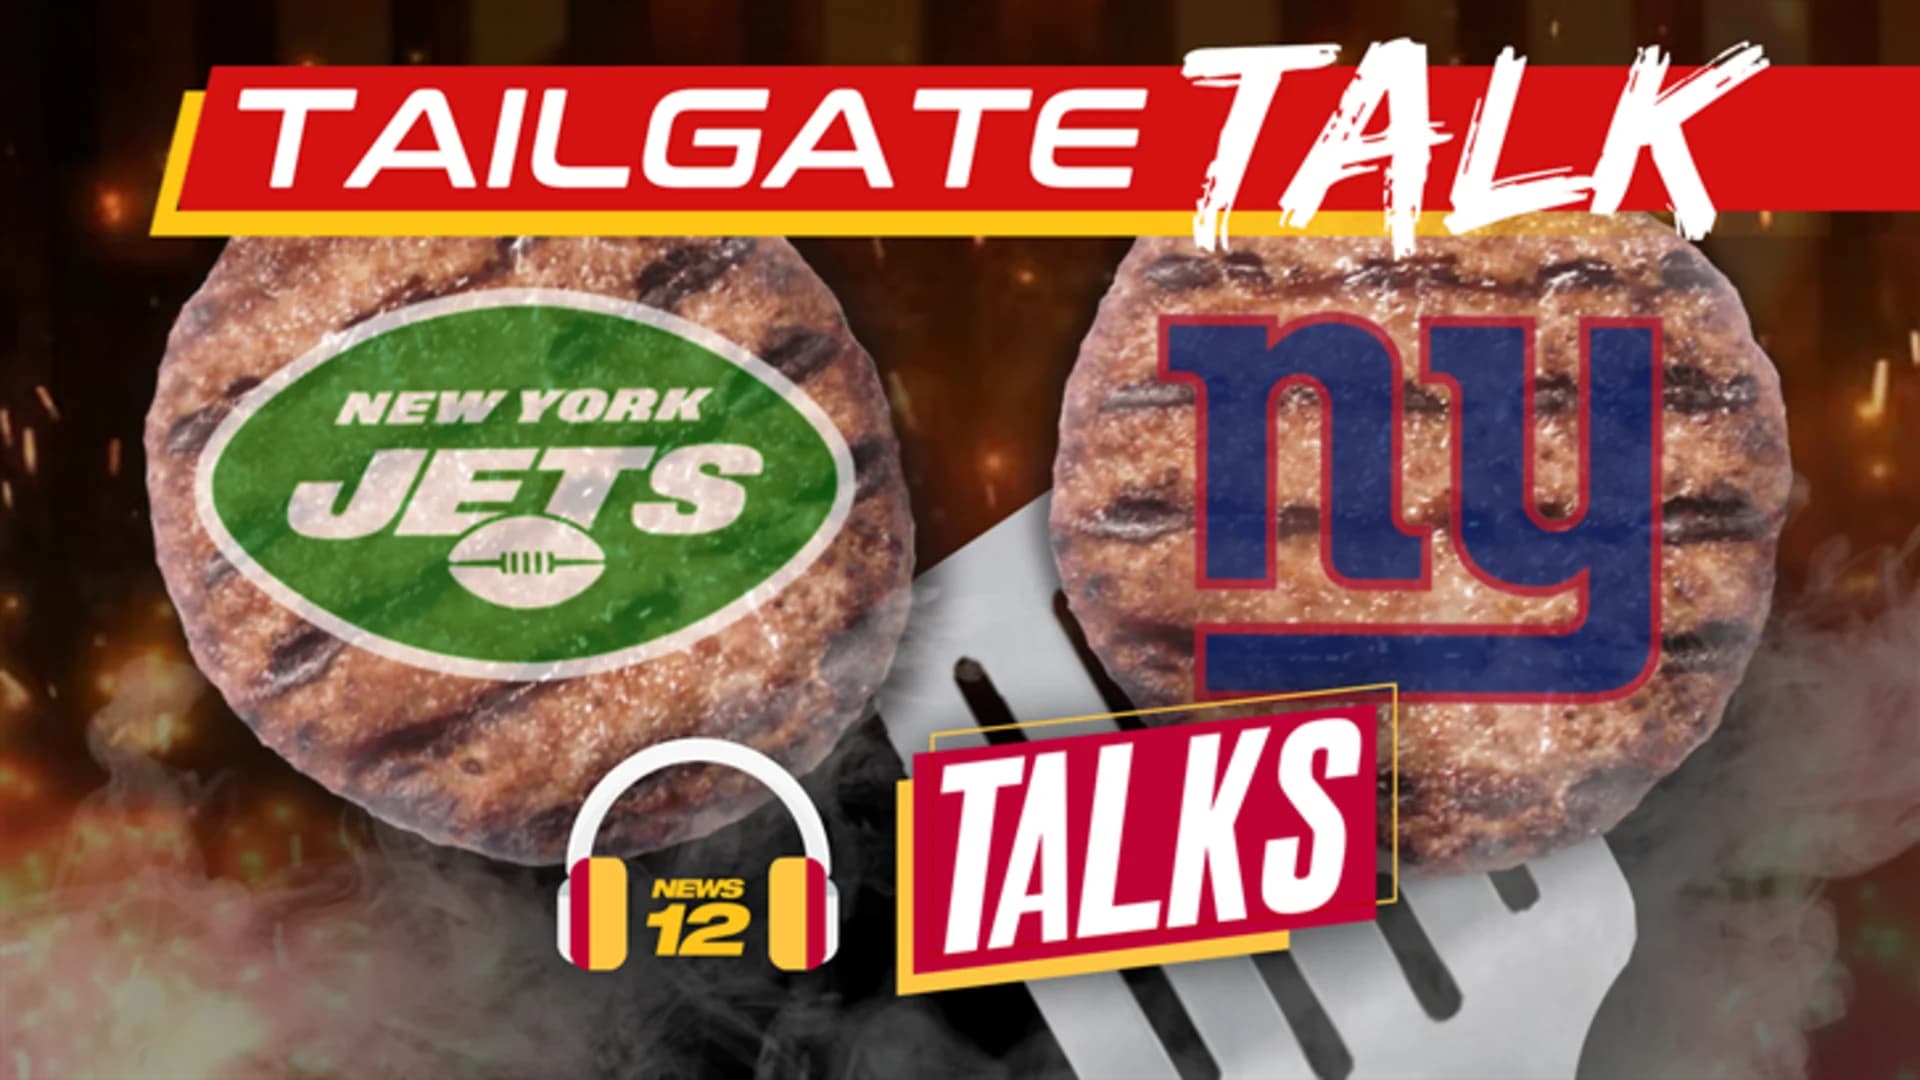 Jets & Giants Tailgate Talk podcast: Moving on from Eli, cutting off Francesa (Guest: Pat Hanlon)